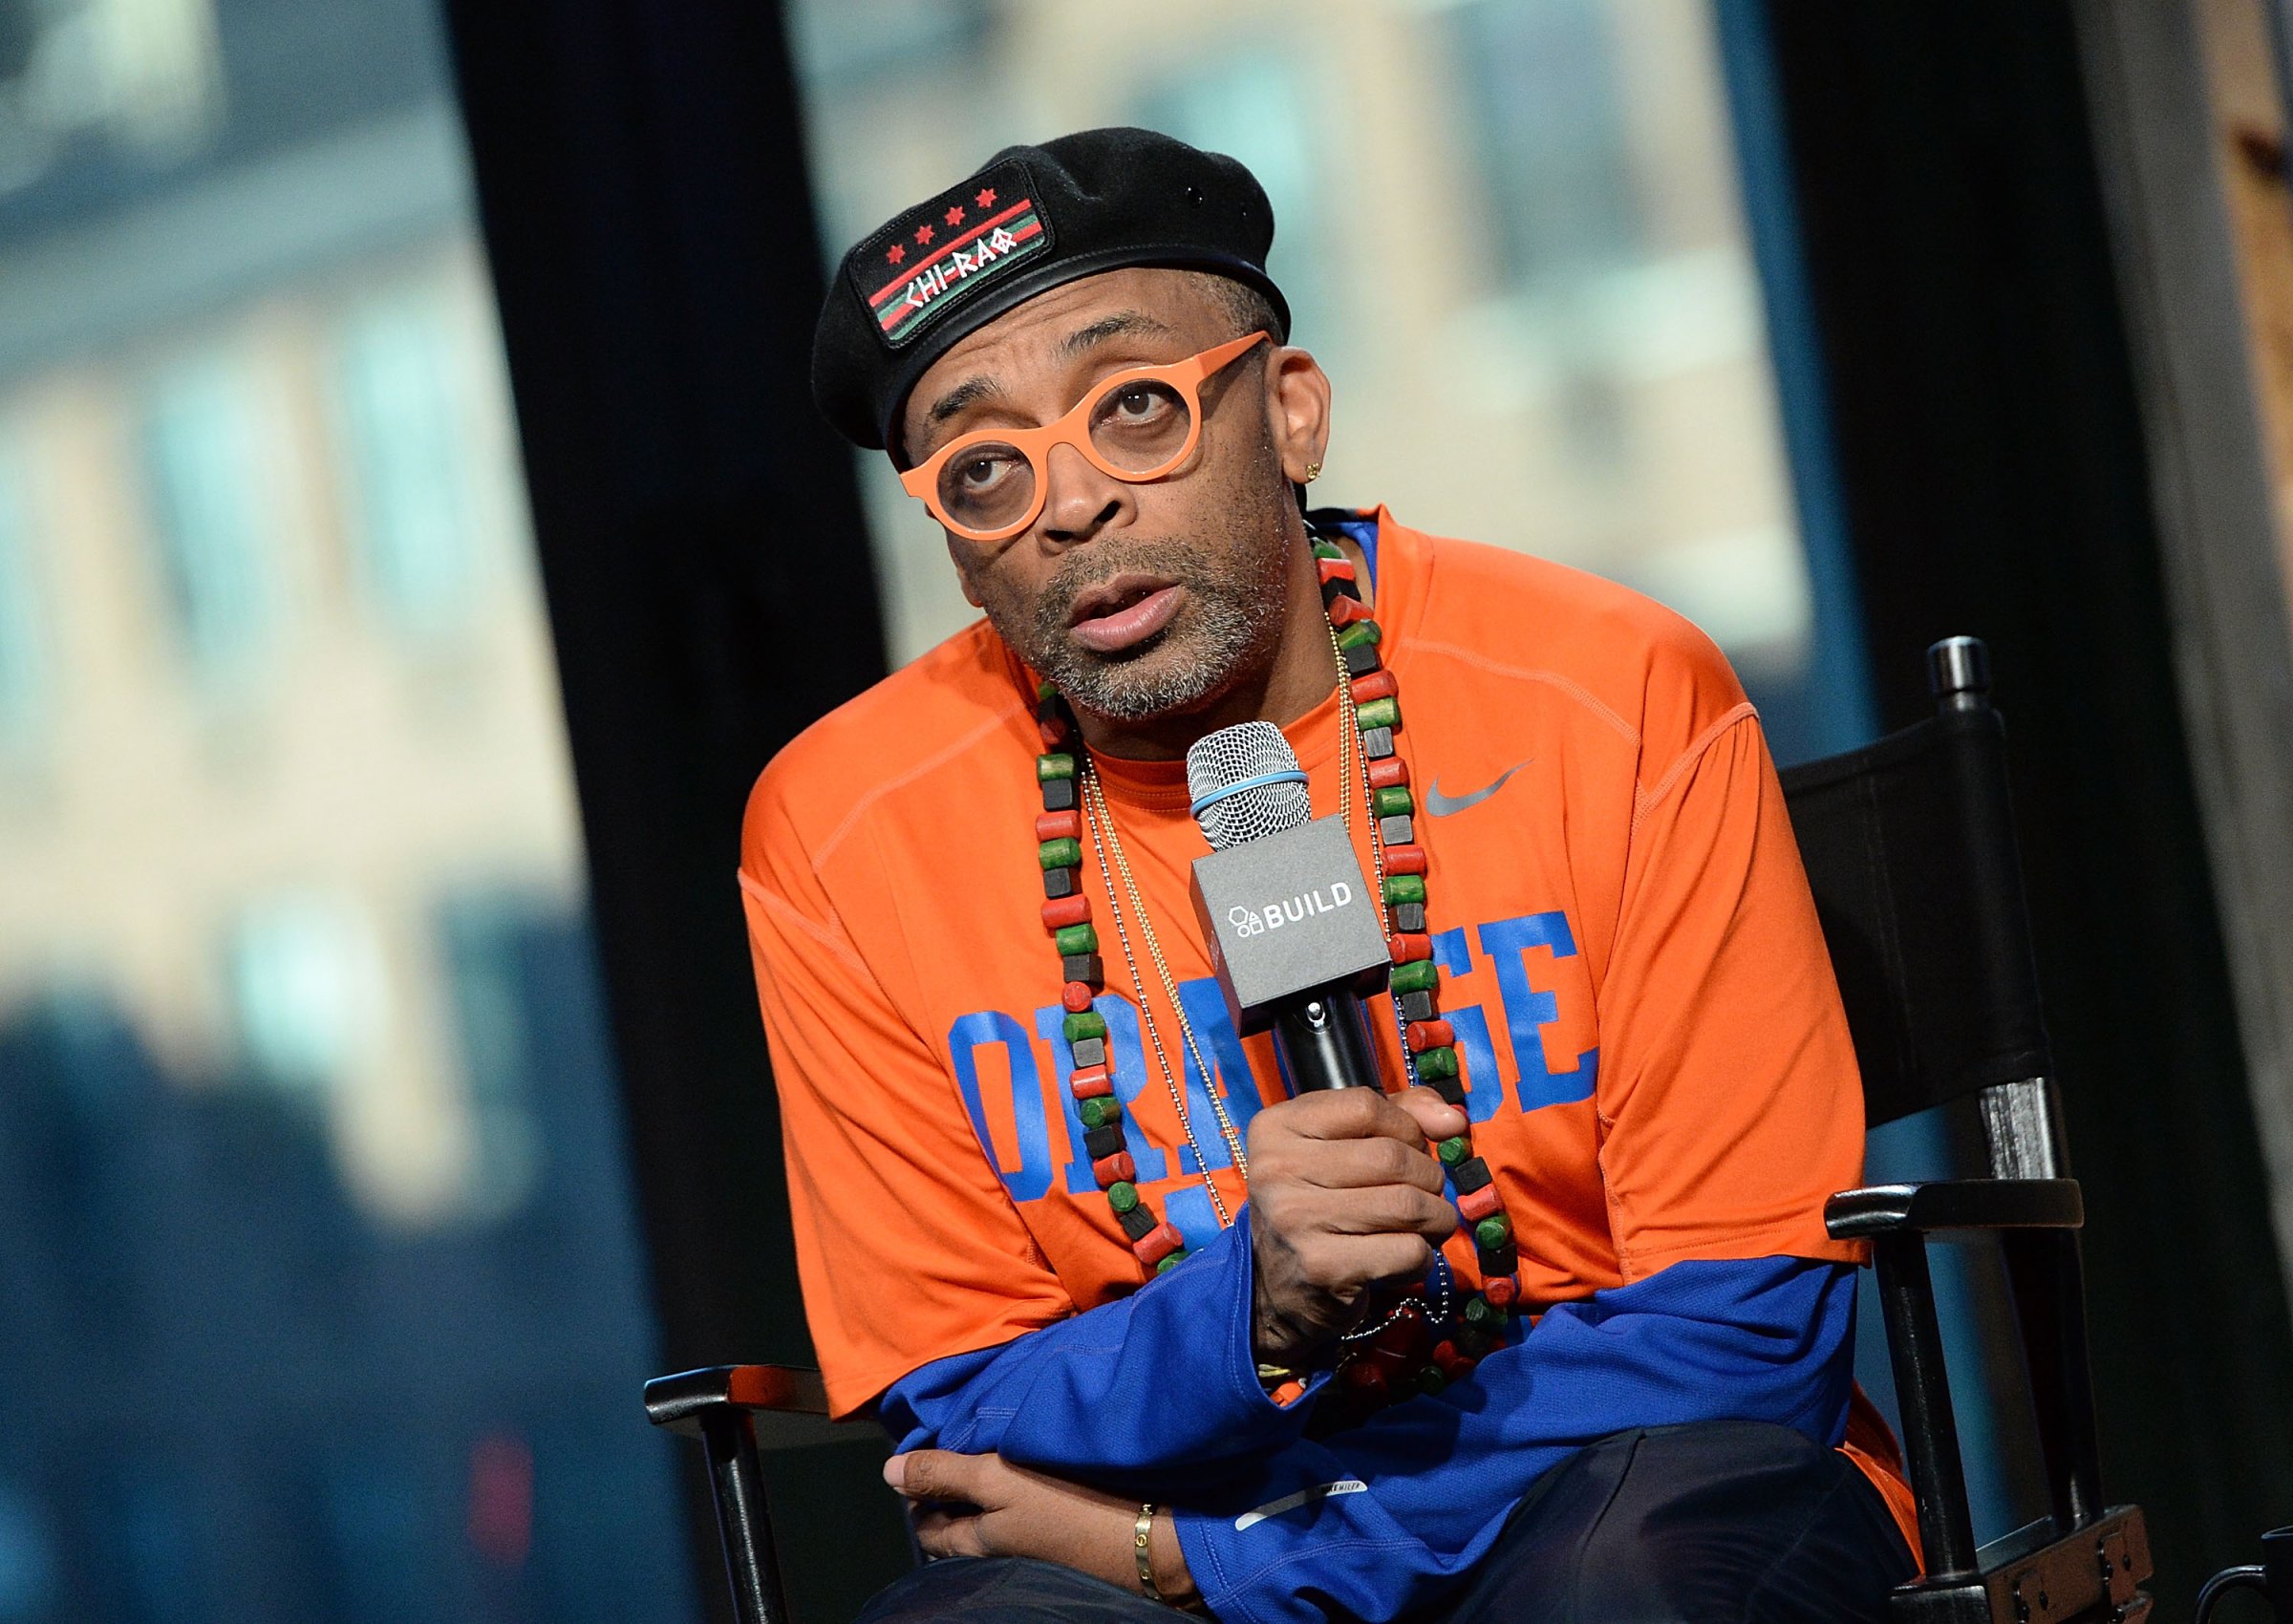 Director Spike Lee discusses the most buzzed about film this season, "Chi-Raq" at AOL Studios In New York on December 4, 2015.